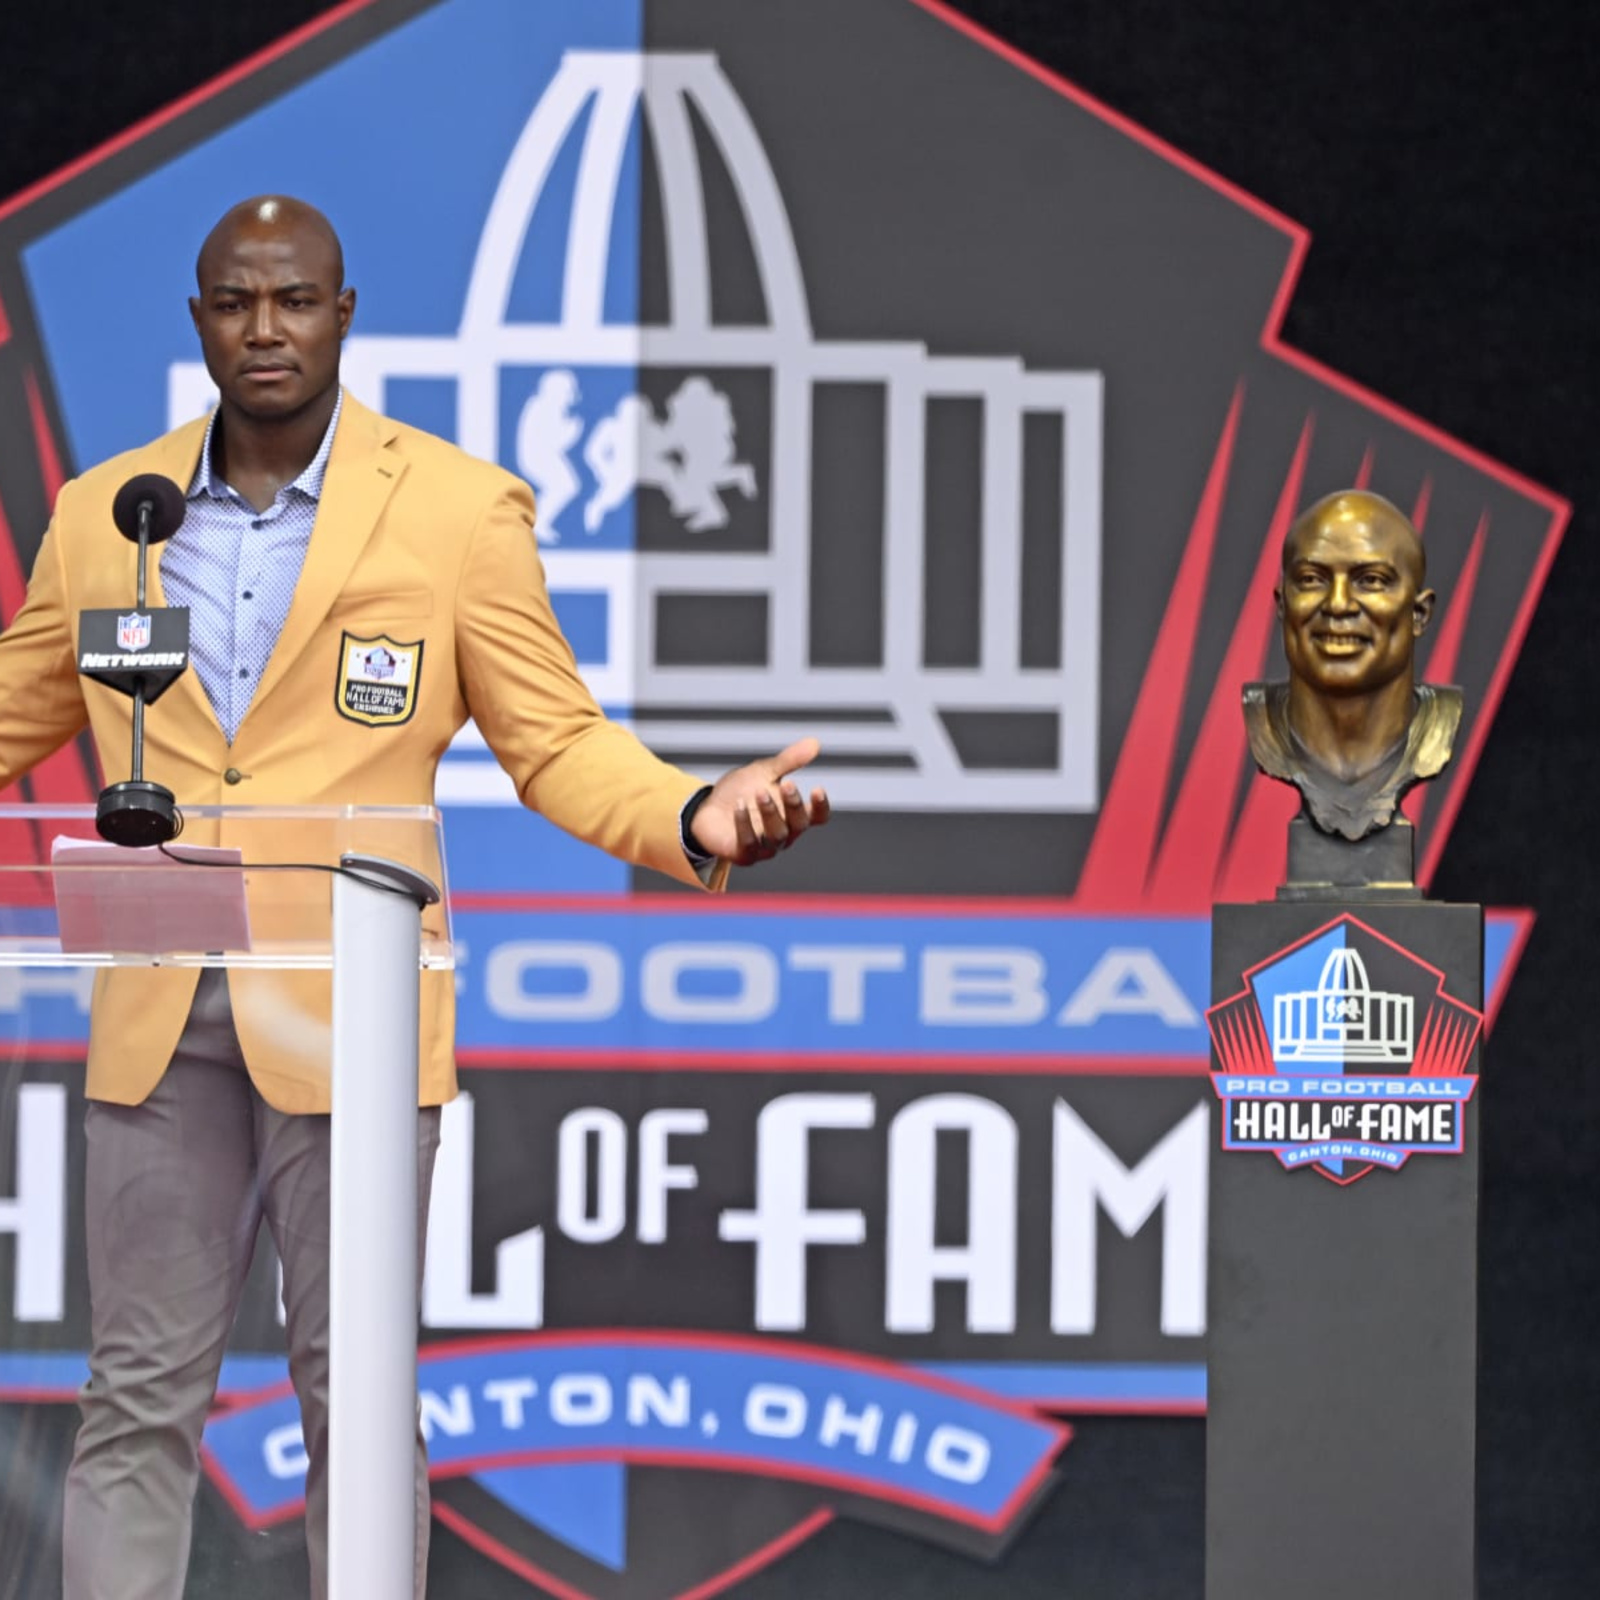 Highlights from Hall of Fame class of 2023 enshrinement speeches